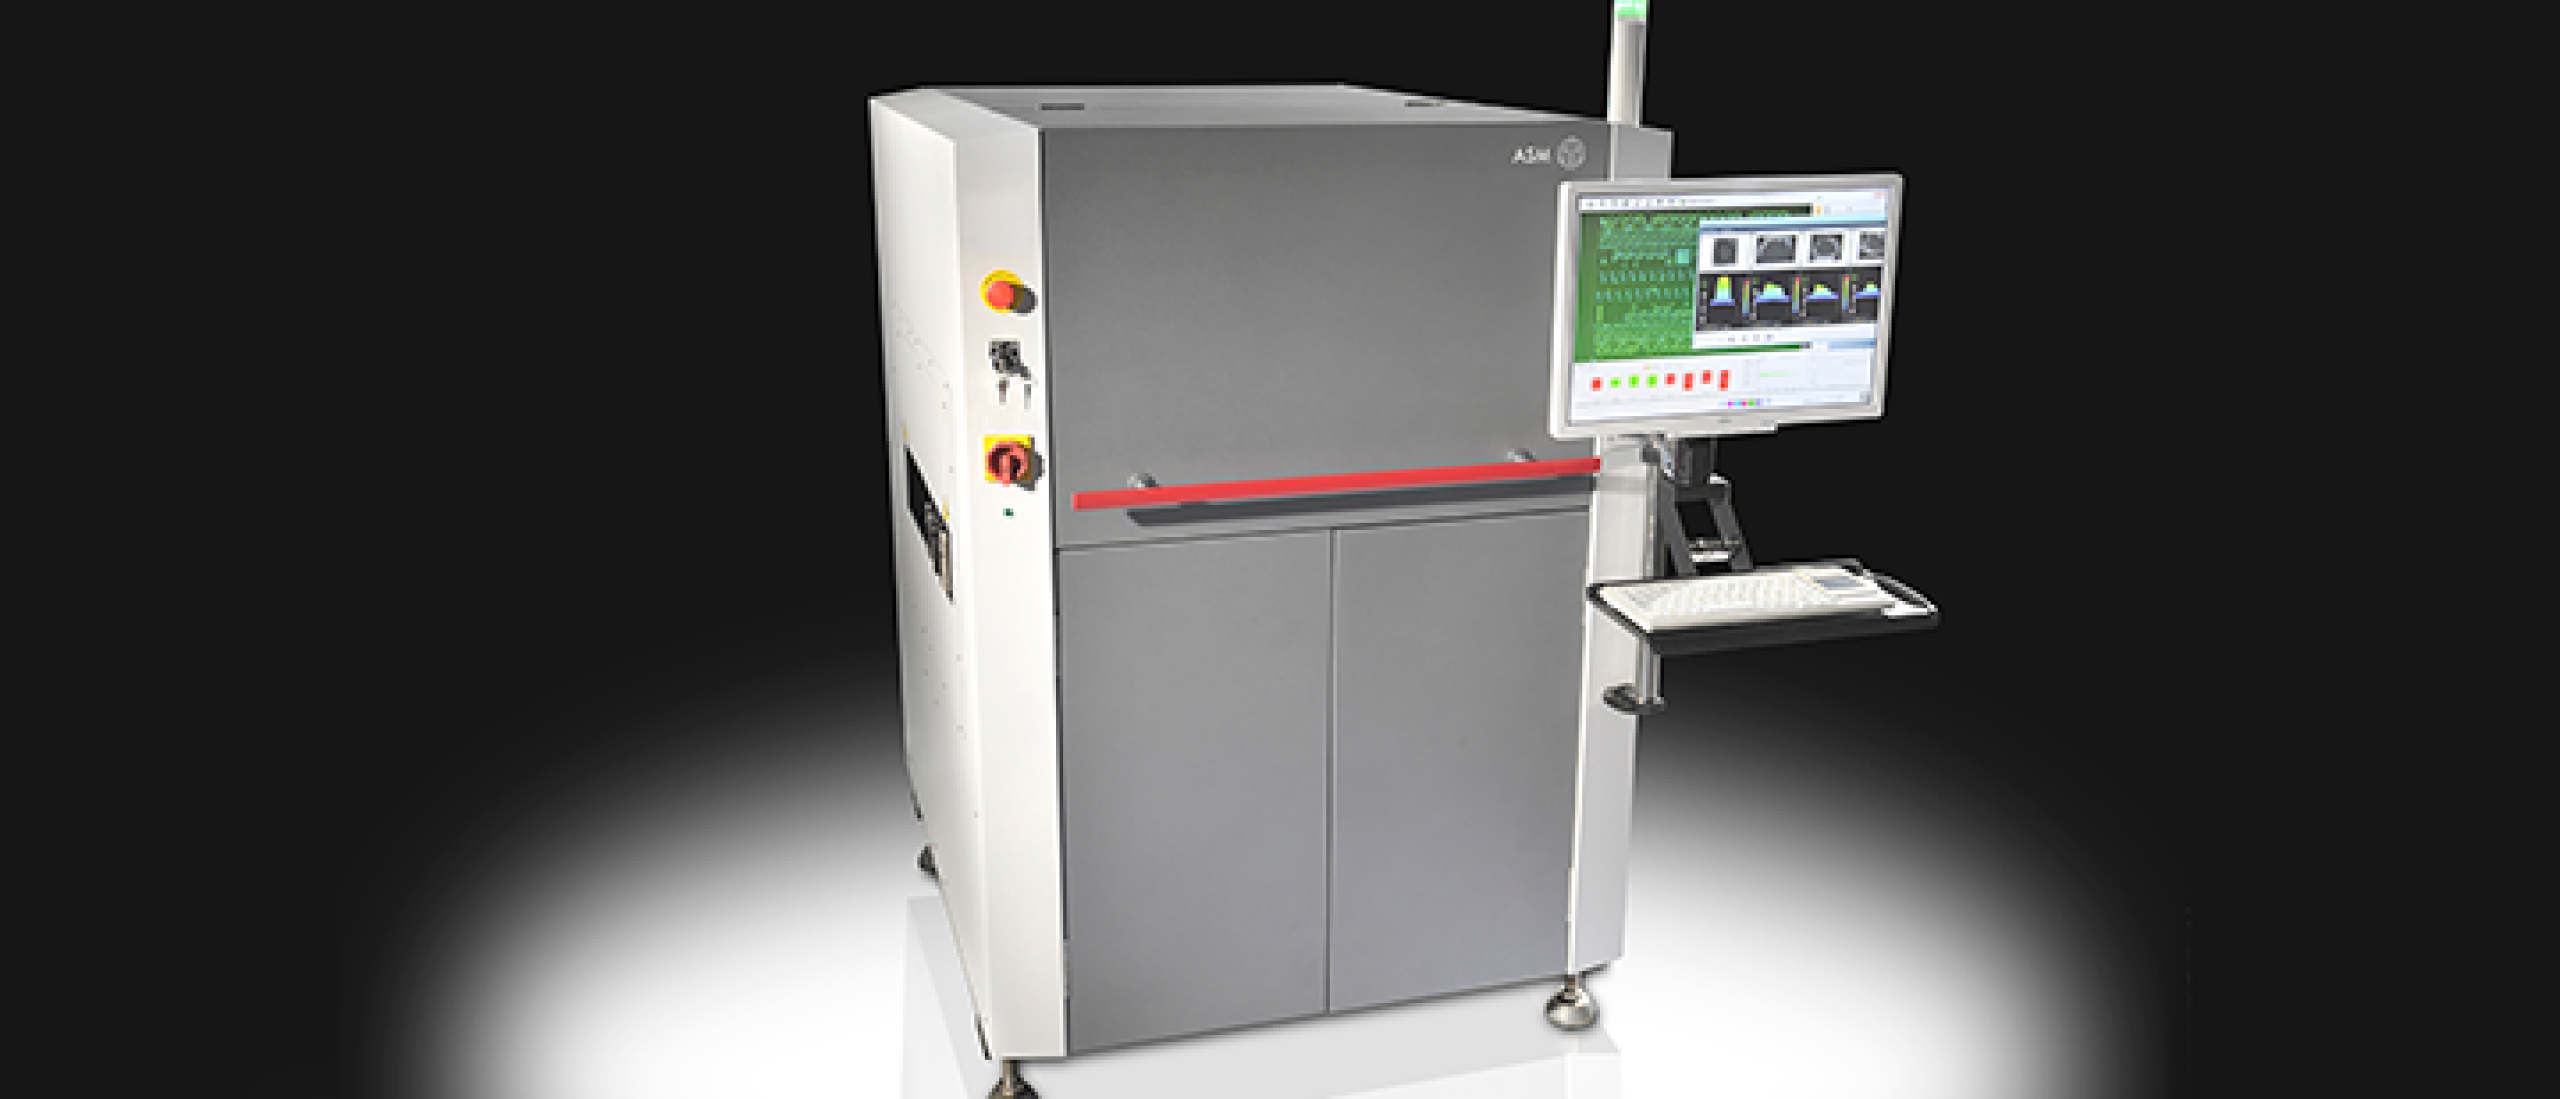 Introduction of the most advanced Solder Paste Inspection system ASMPT process lens HD